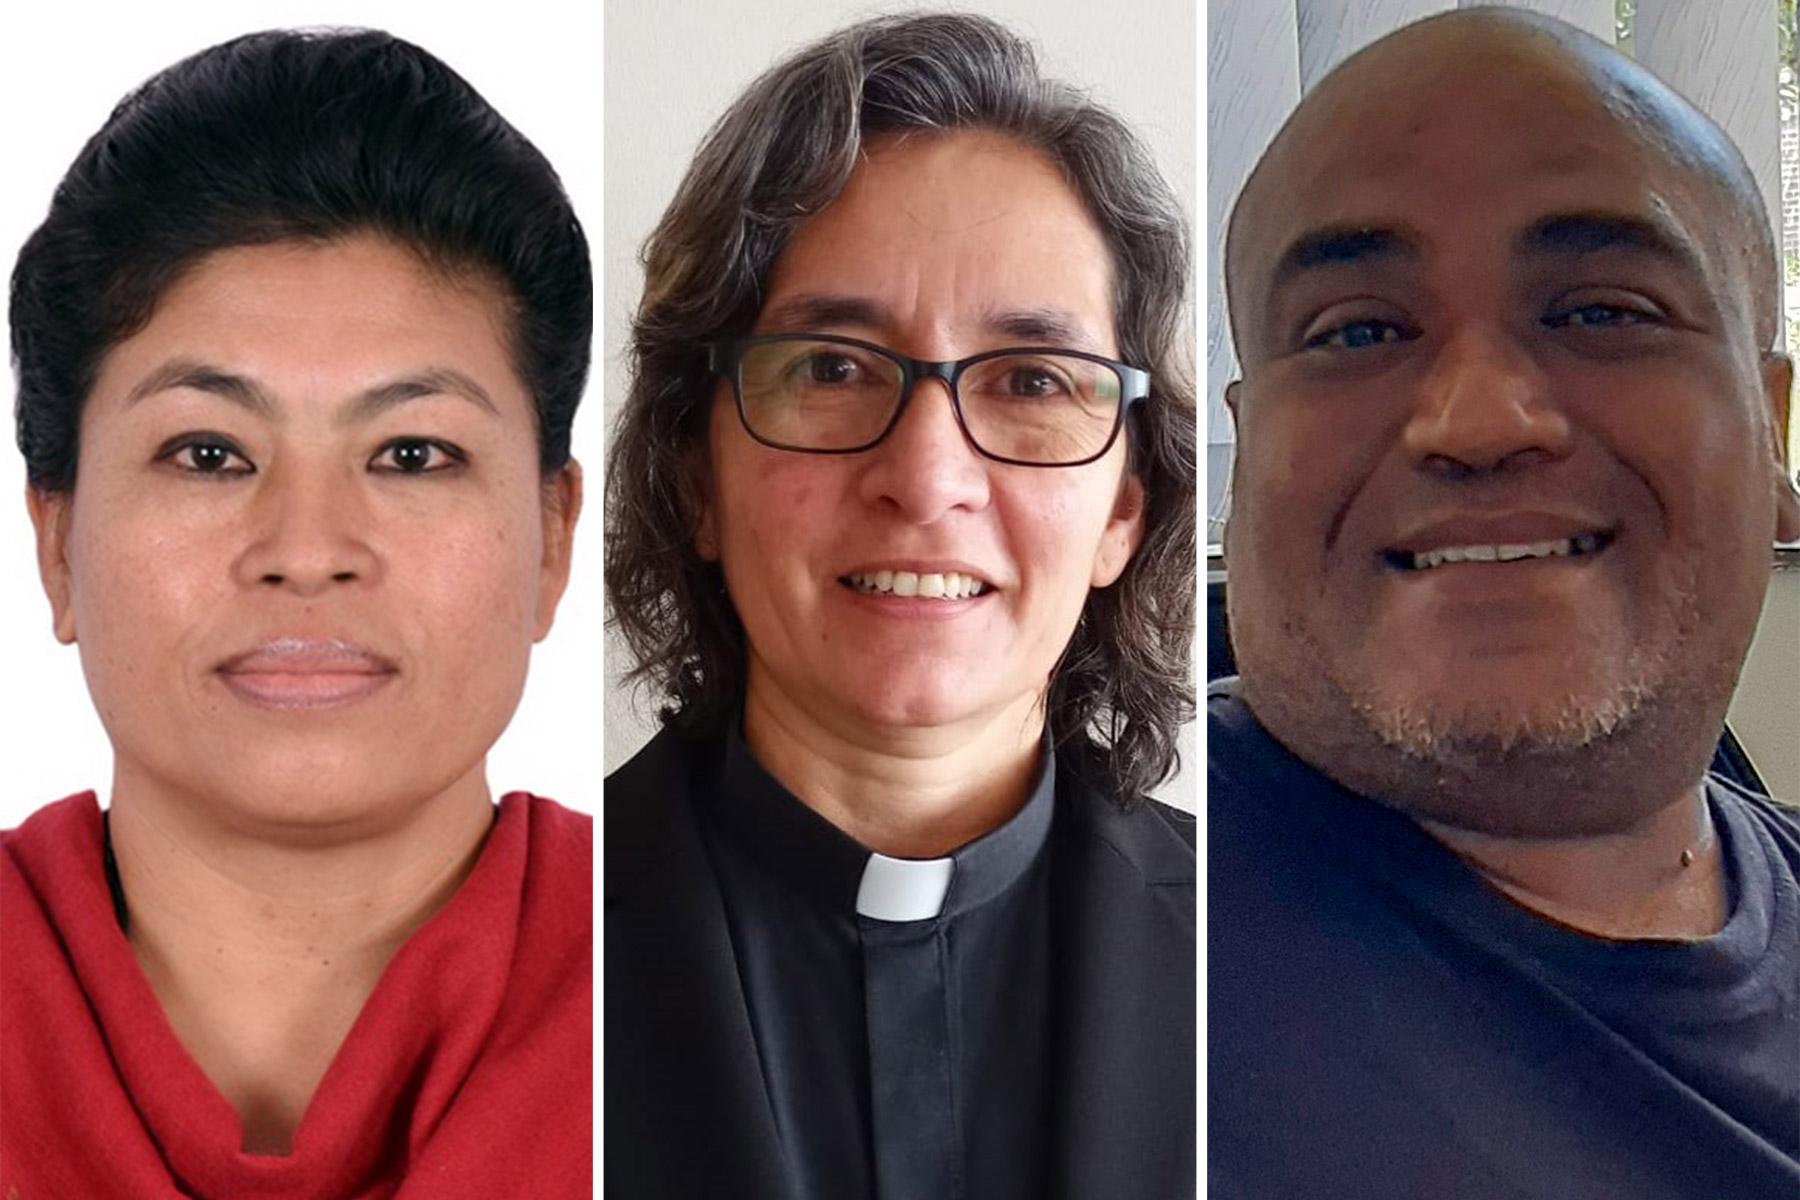 Dr Bijaya Bajracharya, Country Director of LWF Nepal, Rev. Liria Consuelo Preciado of the Evangelical Lutheran Church in Colombia and Rev. Denver Grauman of the Moravian Church in South Africa shared experiences of their work to combat gender-based violence. Photos: Panelistsâ own.